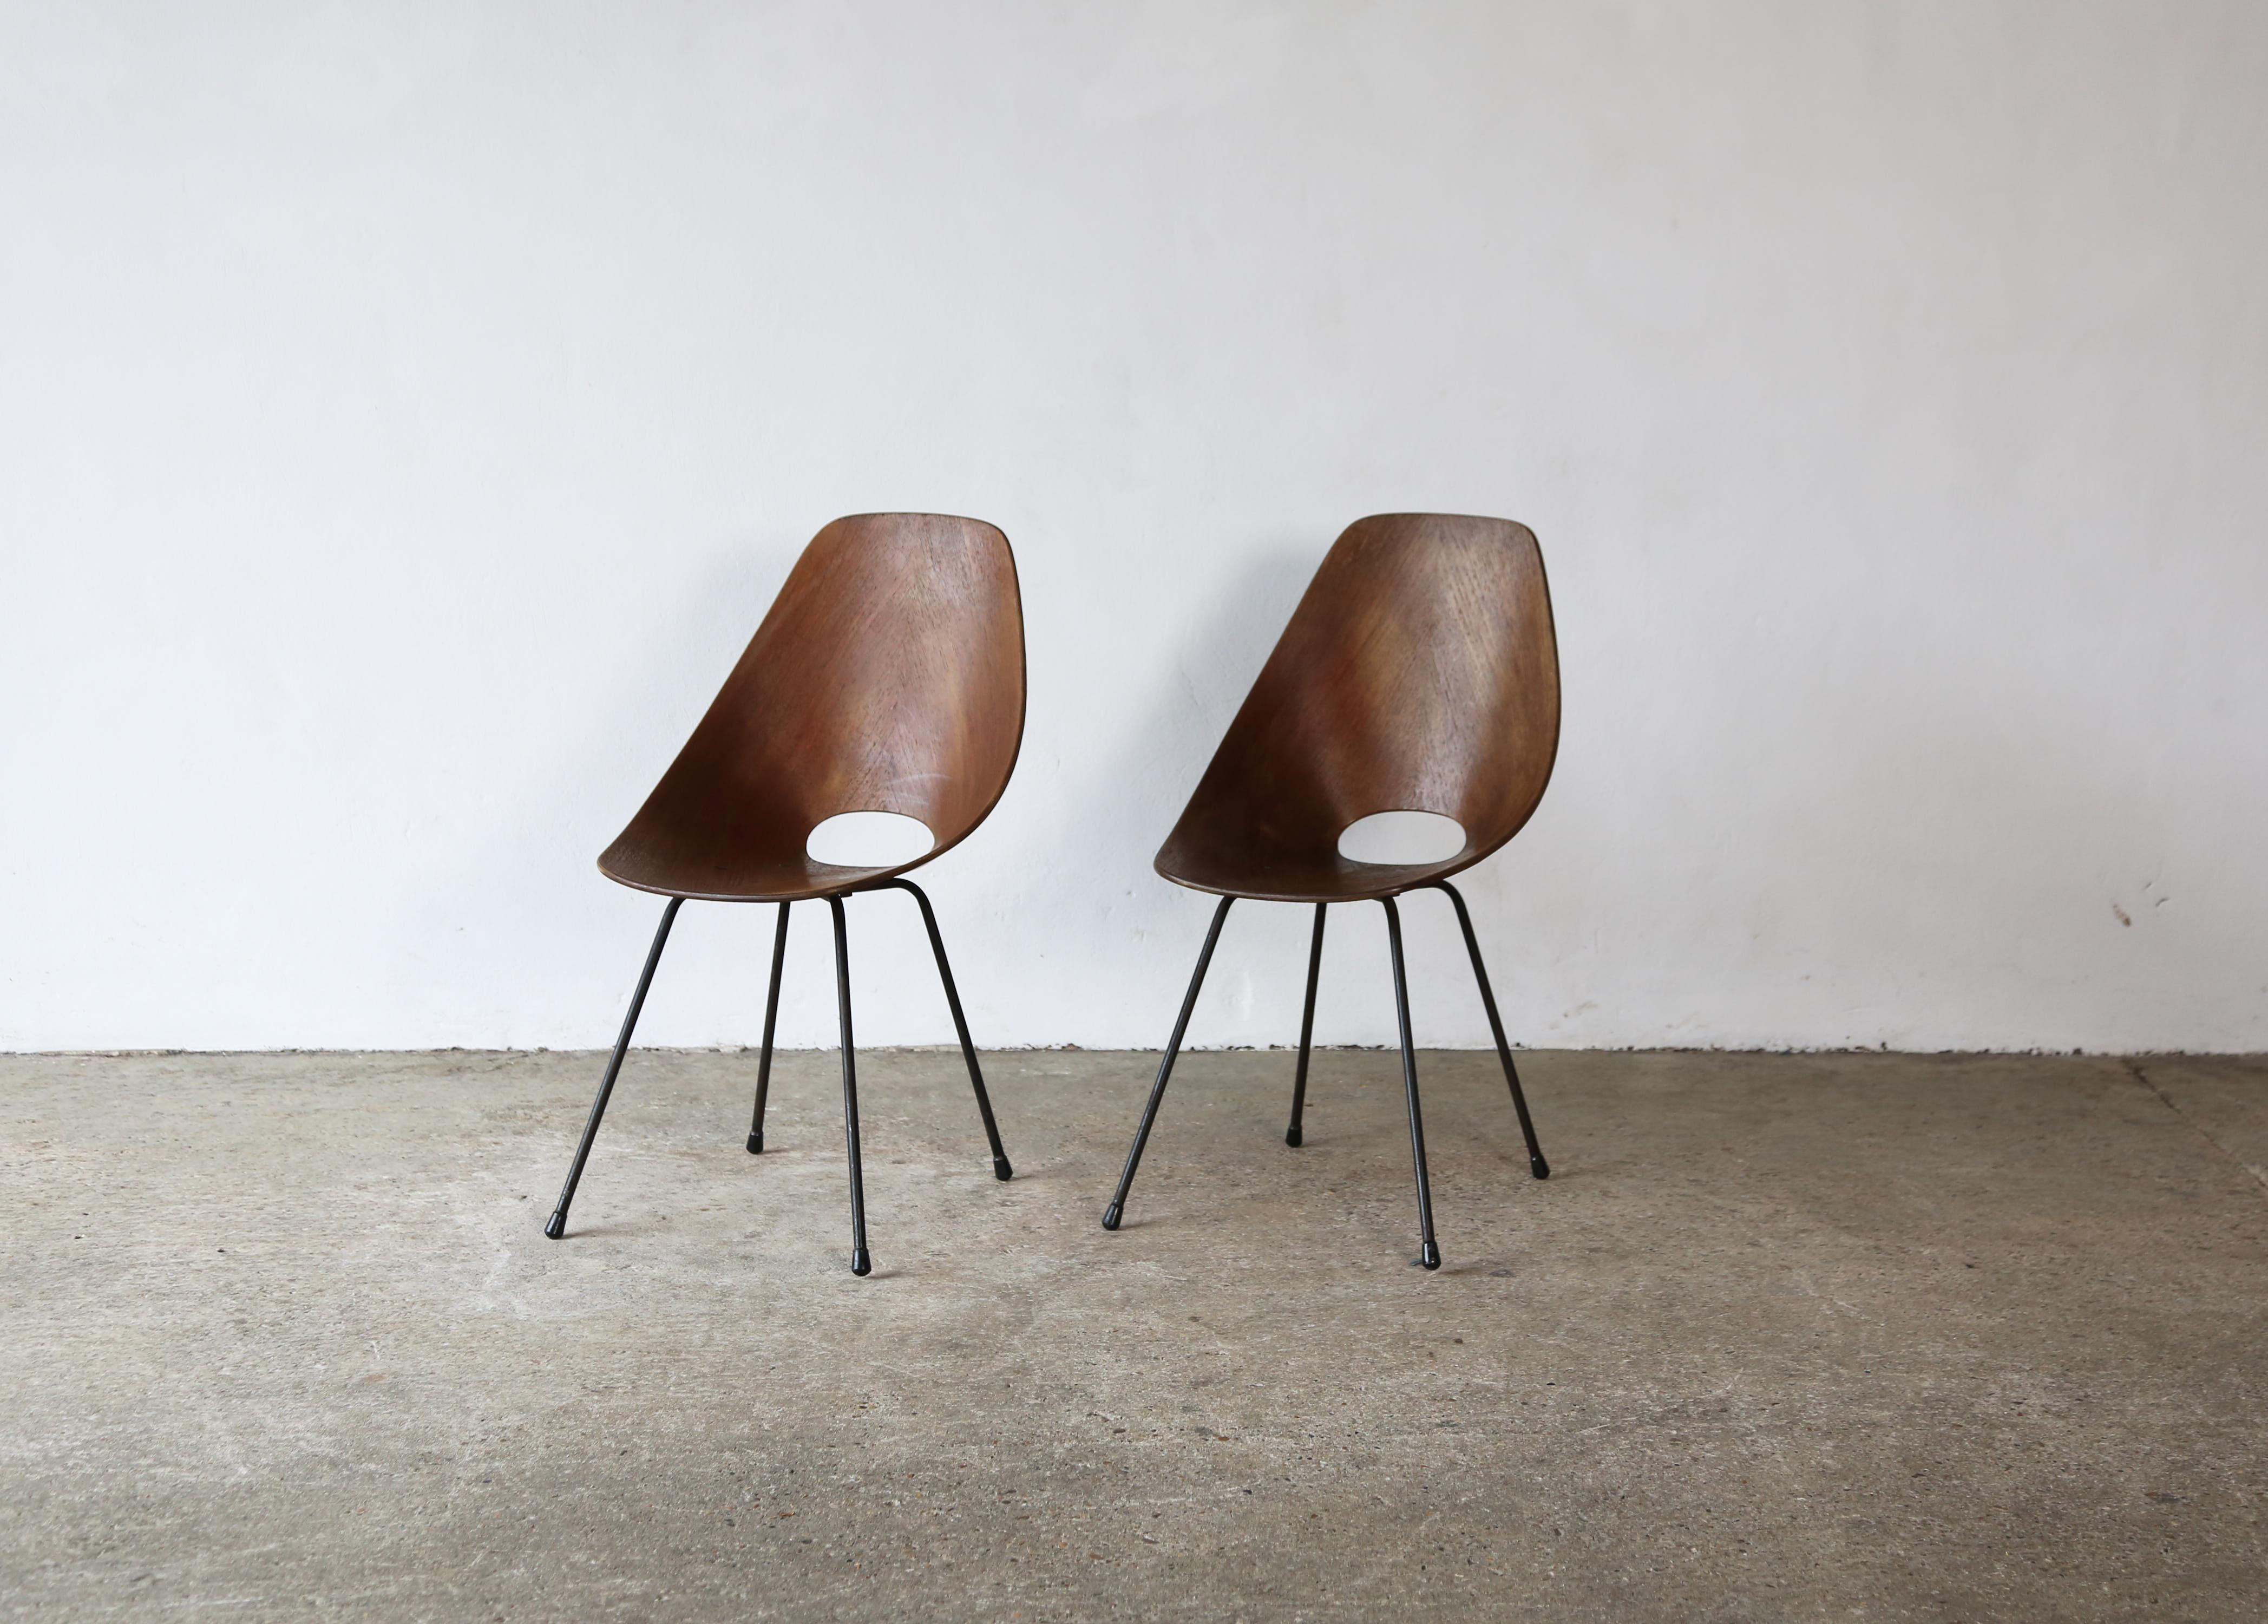 Mid-Century Modern Medea Chairs by Vittorio Nobili, Fratelli Tagliabue, Italy, 1950s For Sale